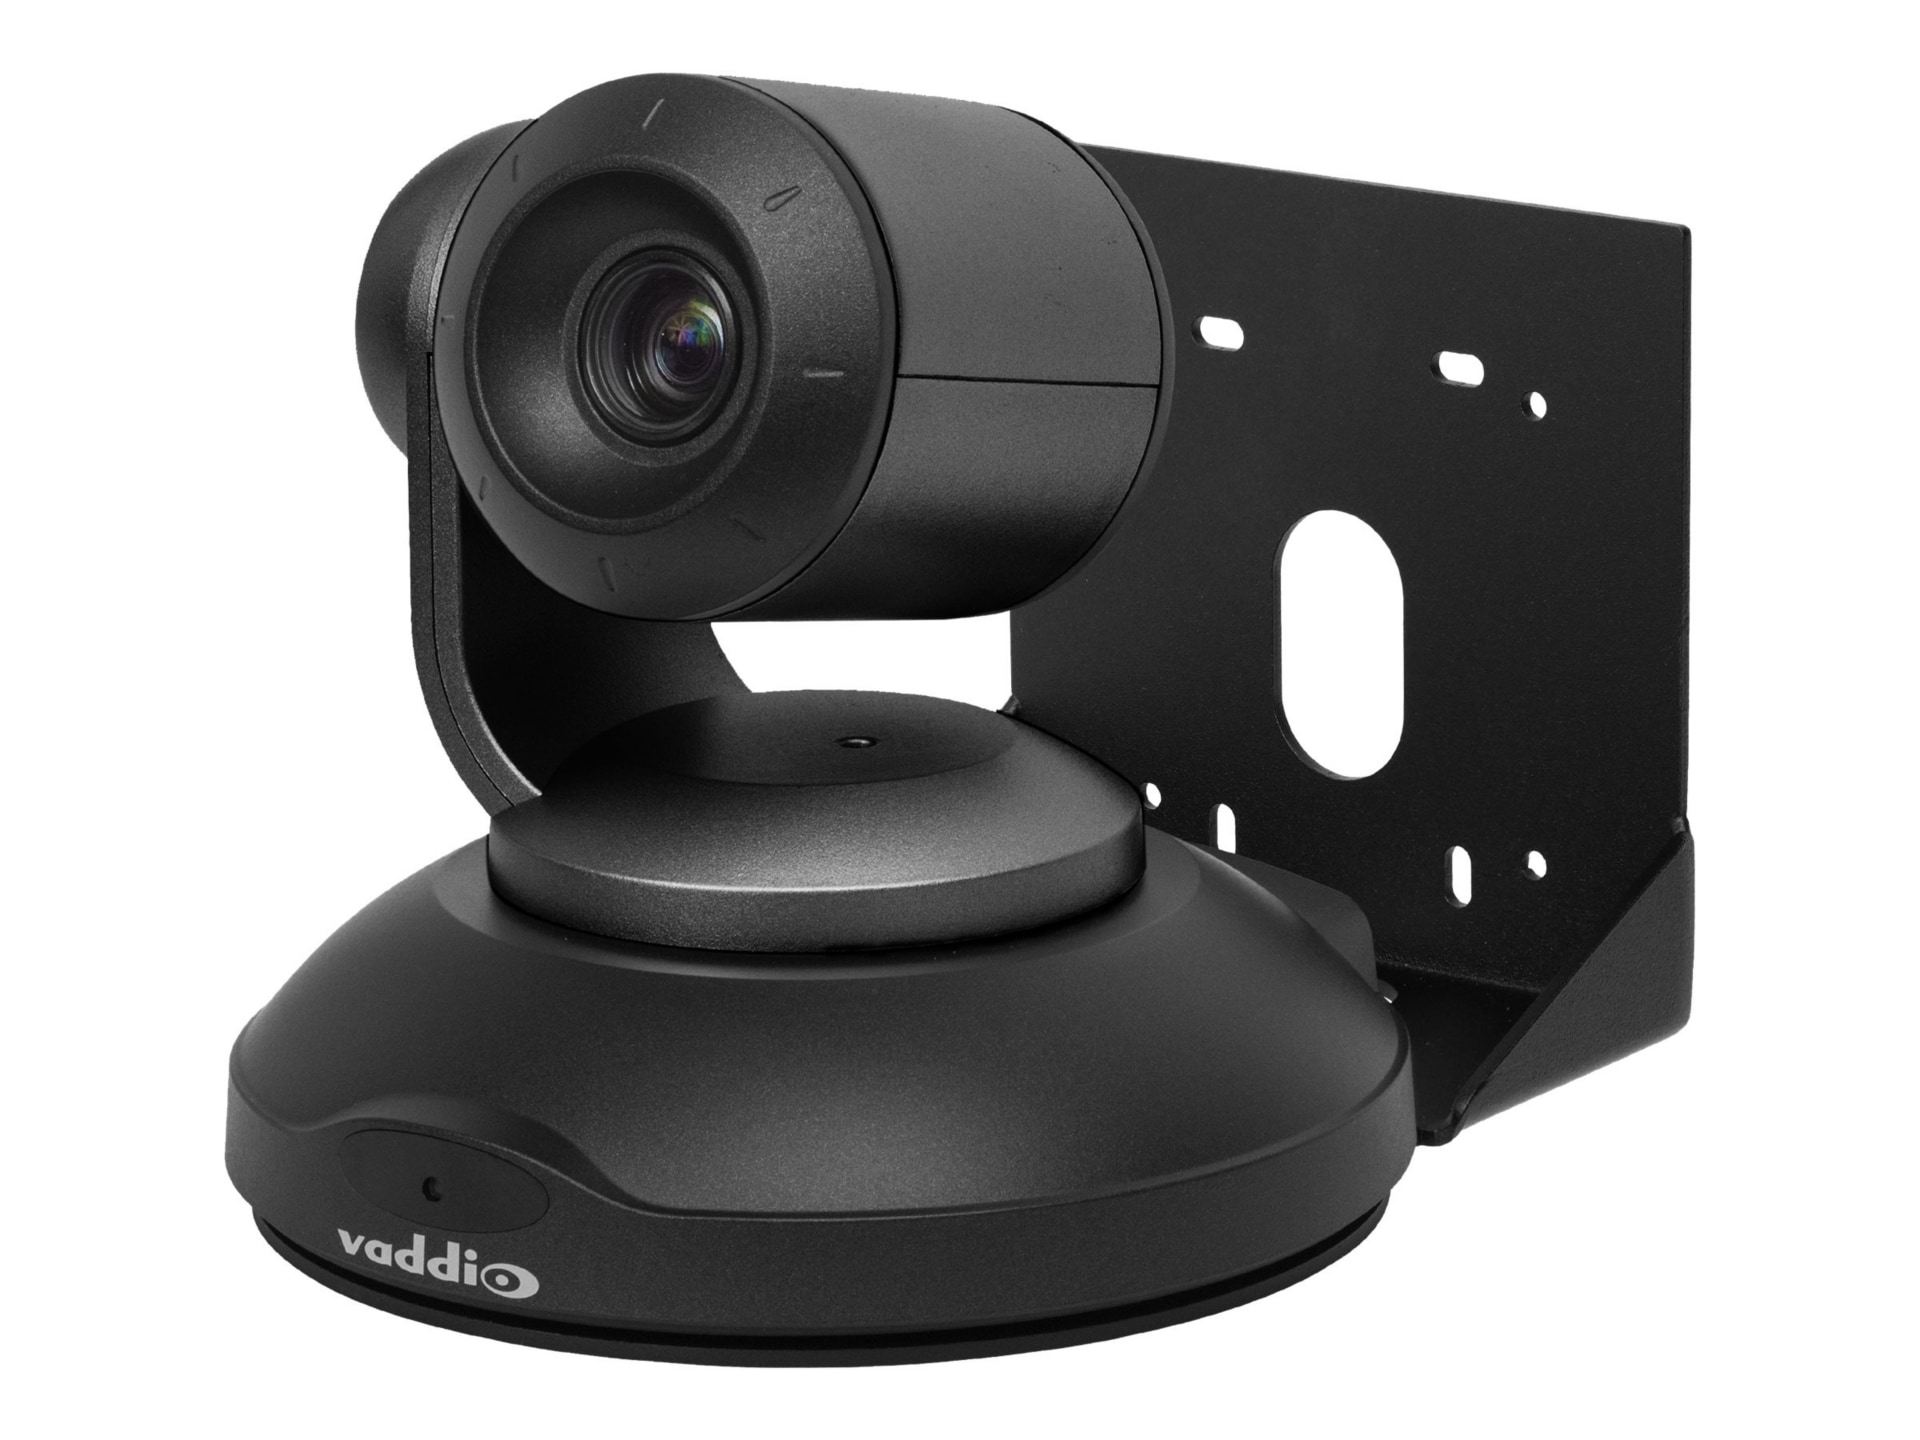 Vaddio ConferenceSHOT AV HD Video Conferencing System - Includes PTZ Camera, TableMIC Microphones, and HDMI Audio